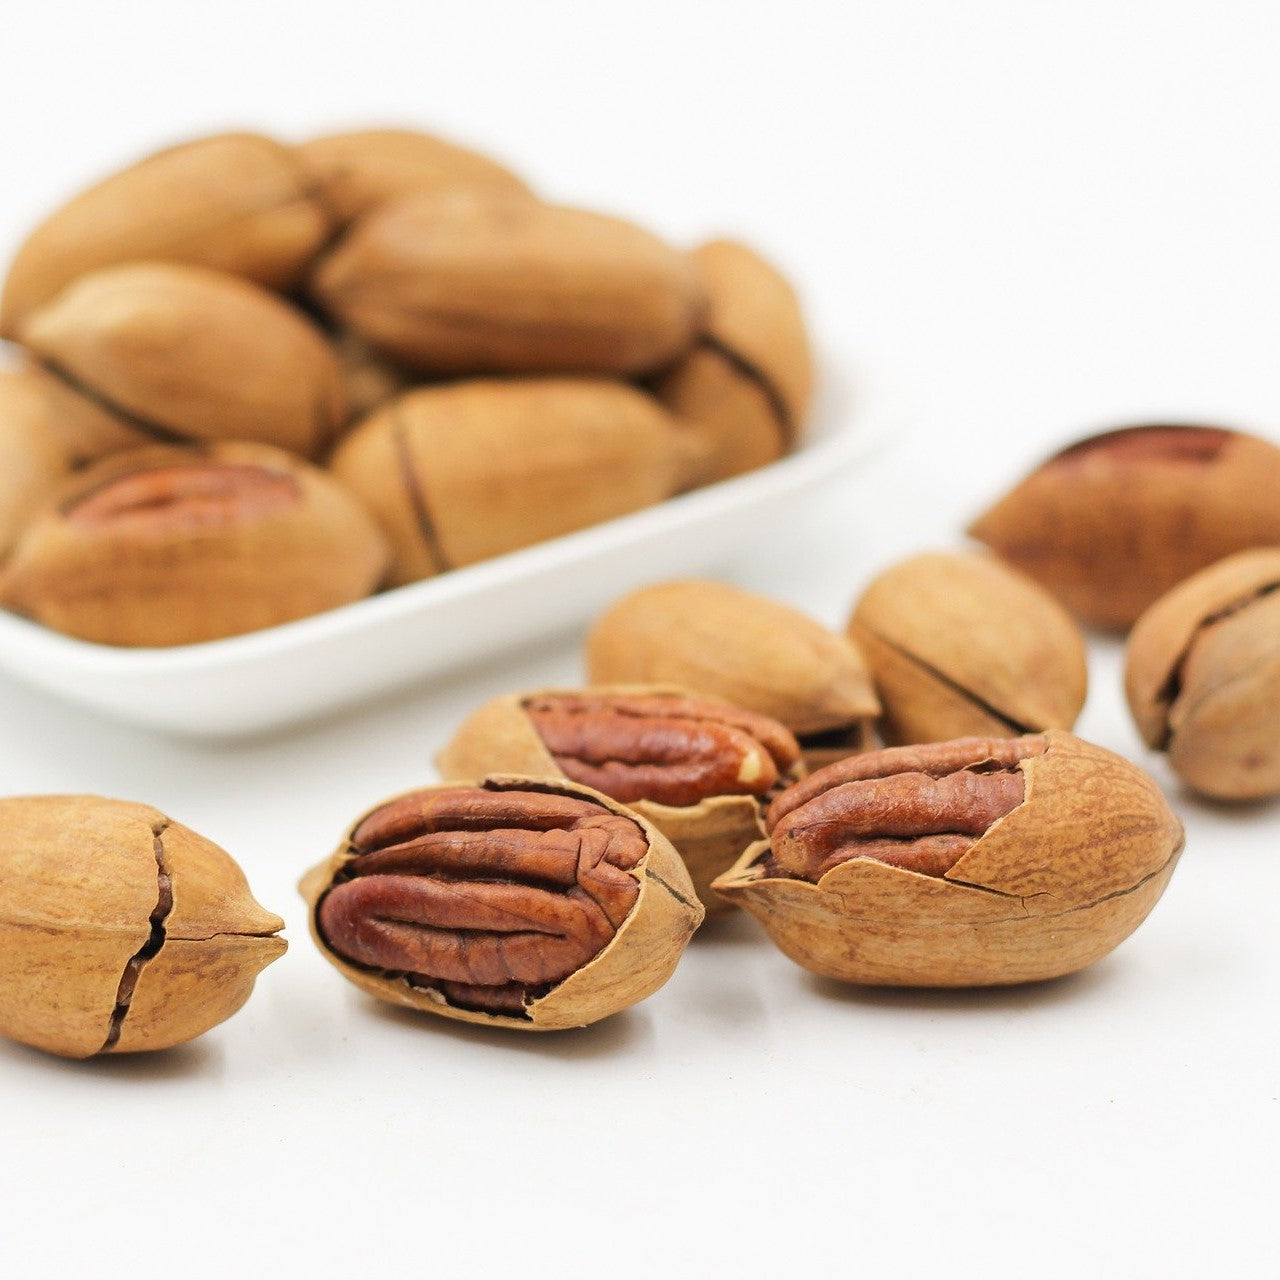 What are the Health Benefits of Pecans?